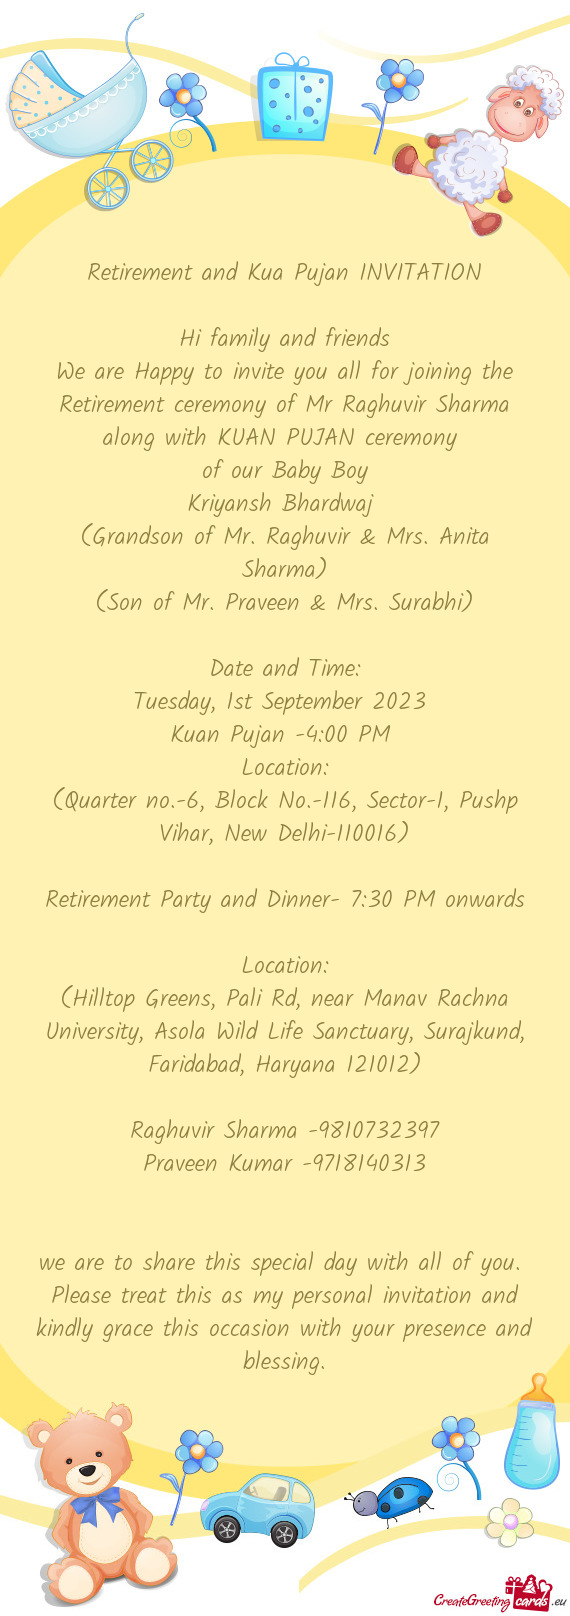 We are Happy to invite you all for joining the Retirement ceremony of Mr Raghuvir Sharma along with